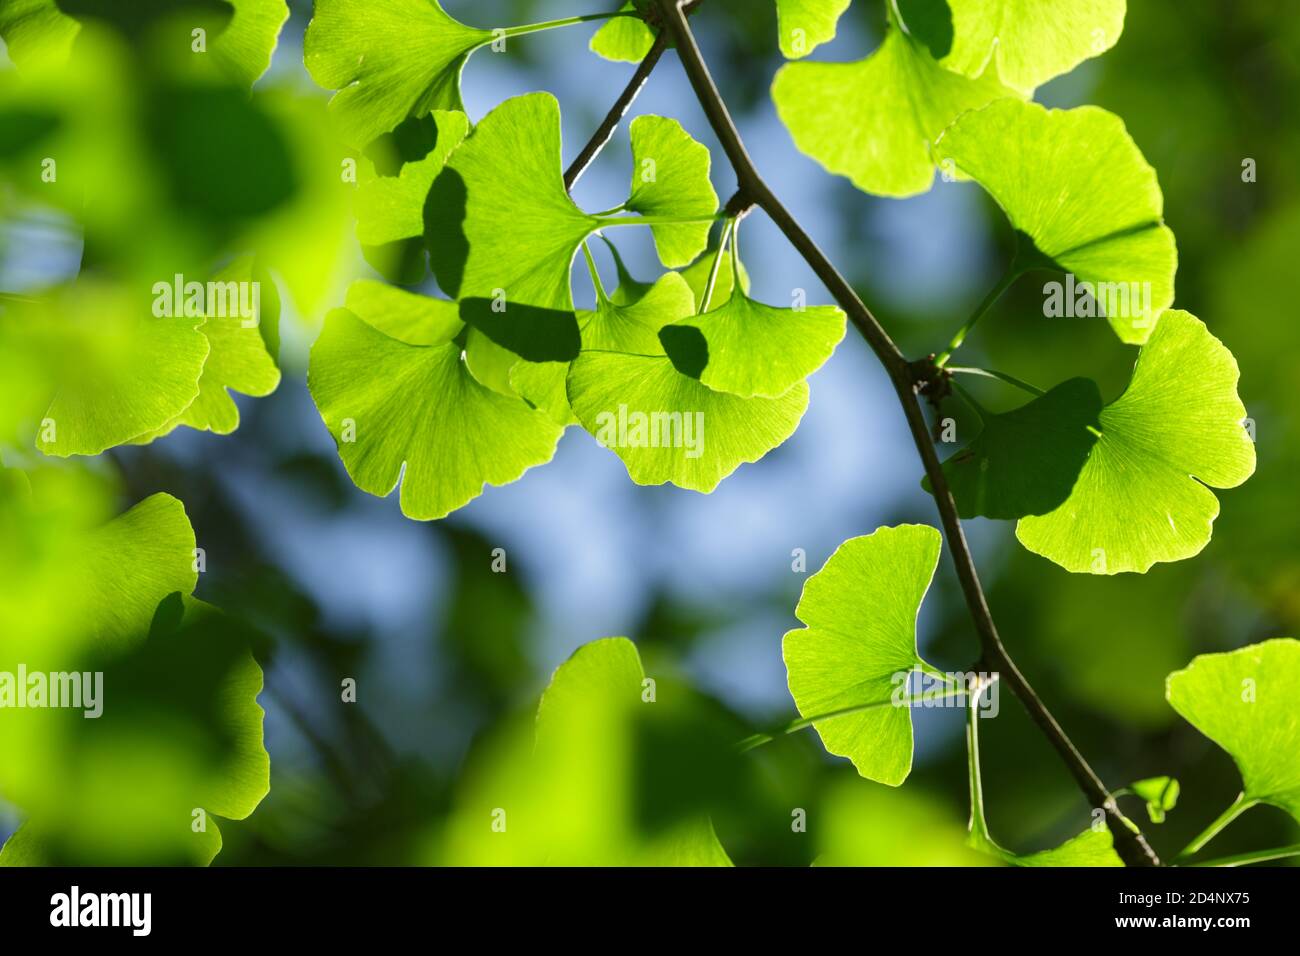 Ginkgo biloba tree. Green young leaves in bright lighting with a blurry background and a blue sky Stock Photo